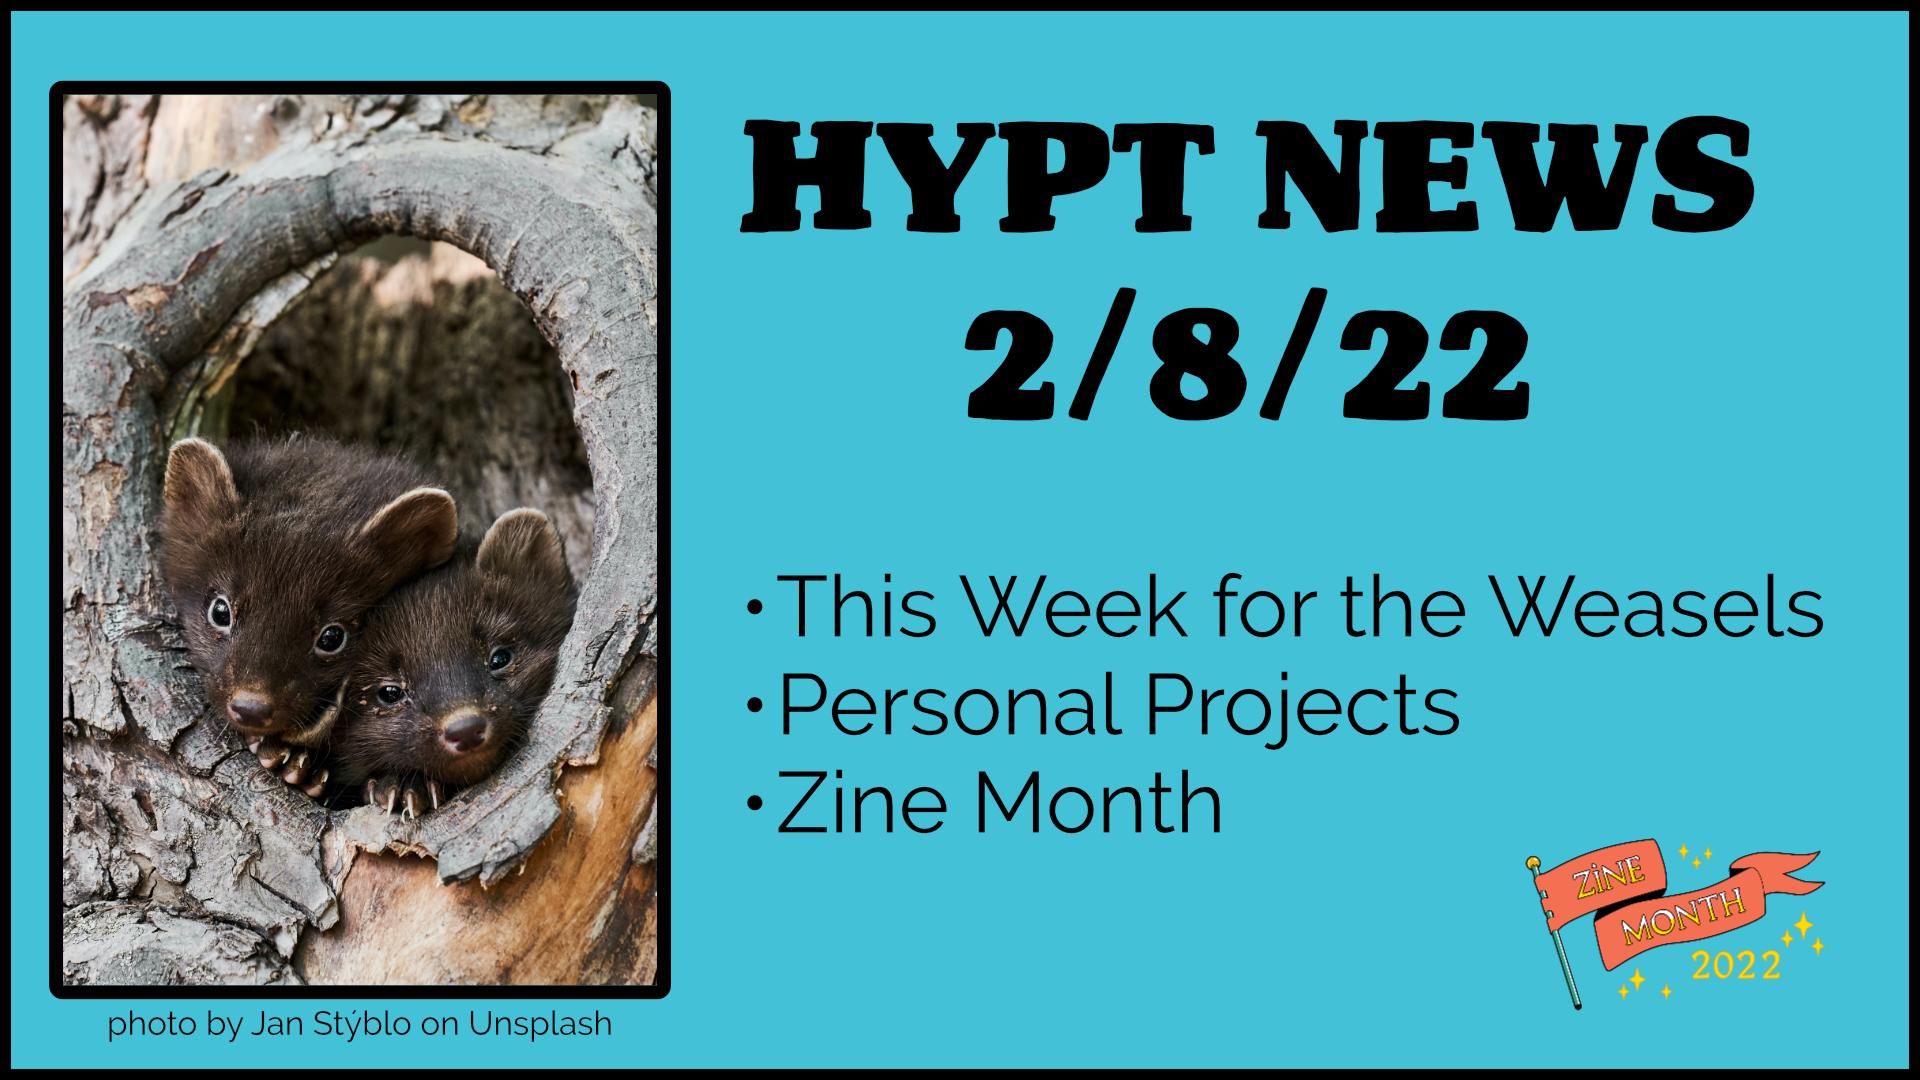 Cover Image for The HYPT Weekly News 2/8/22